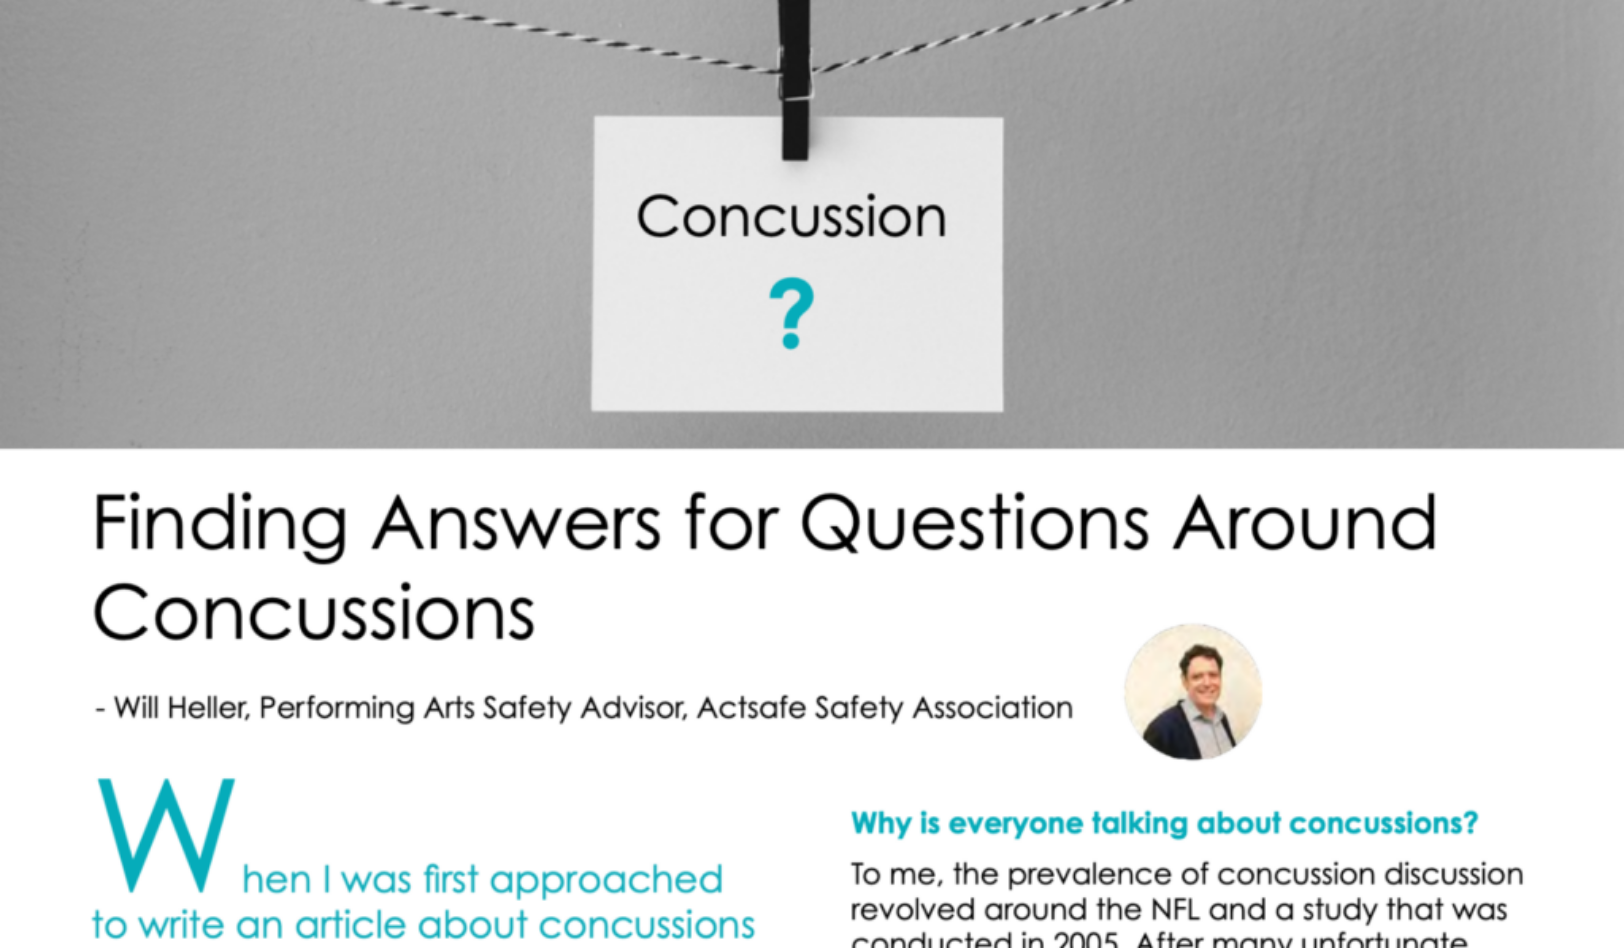 Finding Answers for Questions Around Concussions